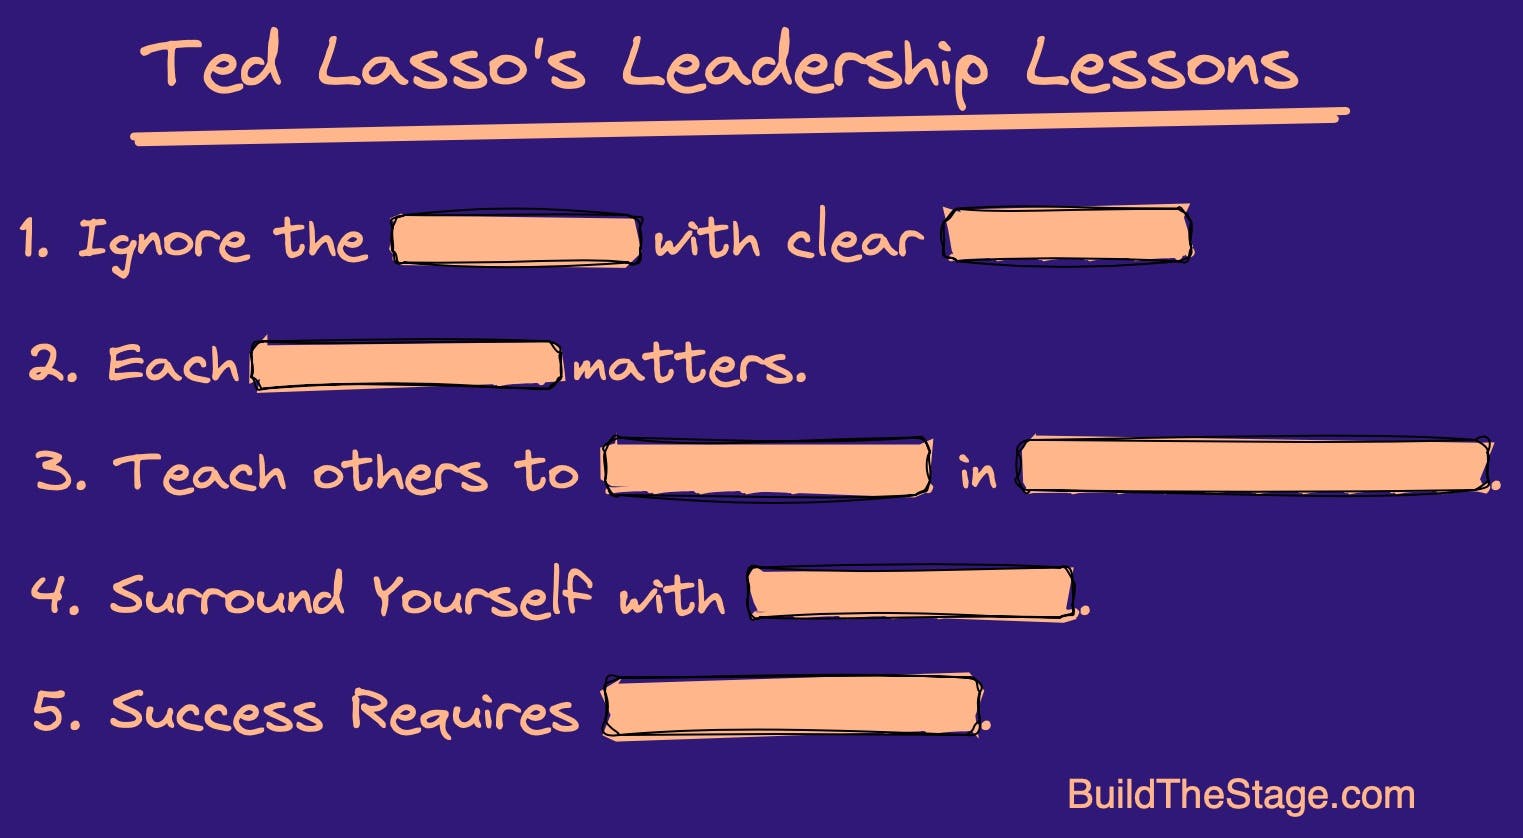 /ted-lassos-leadership-lessons-made-me-a-successful-leader-fk1p3728 feature image